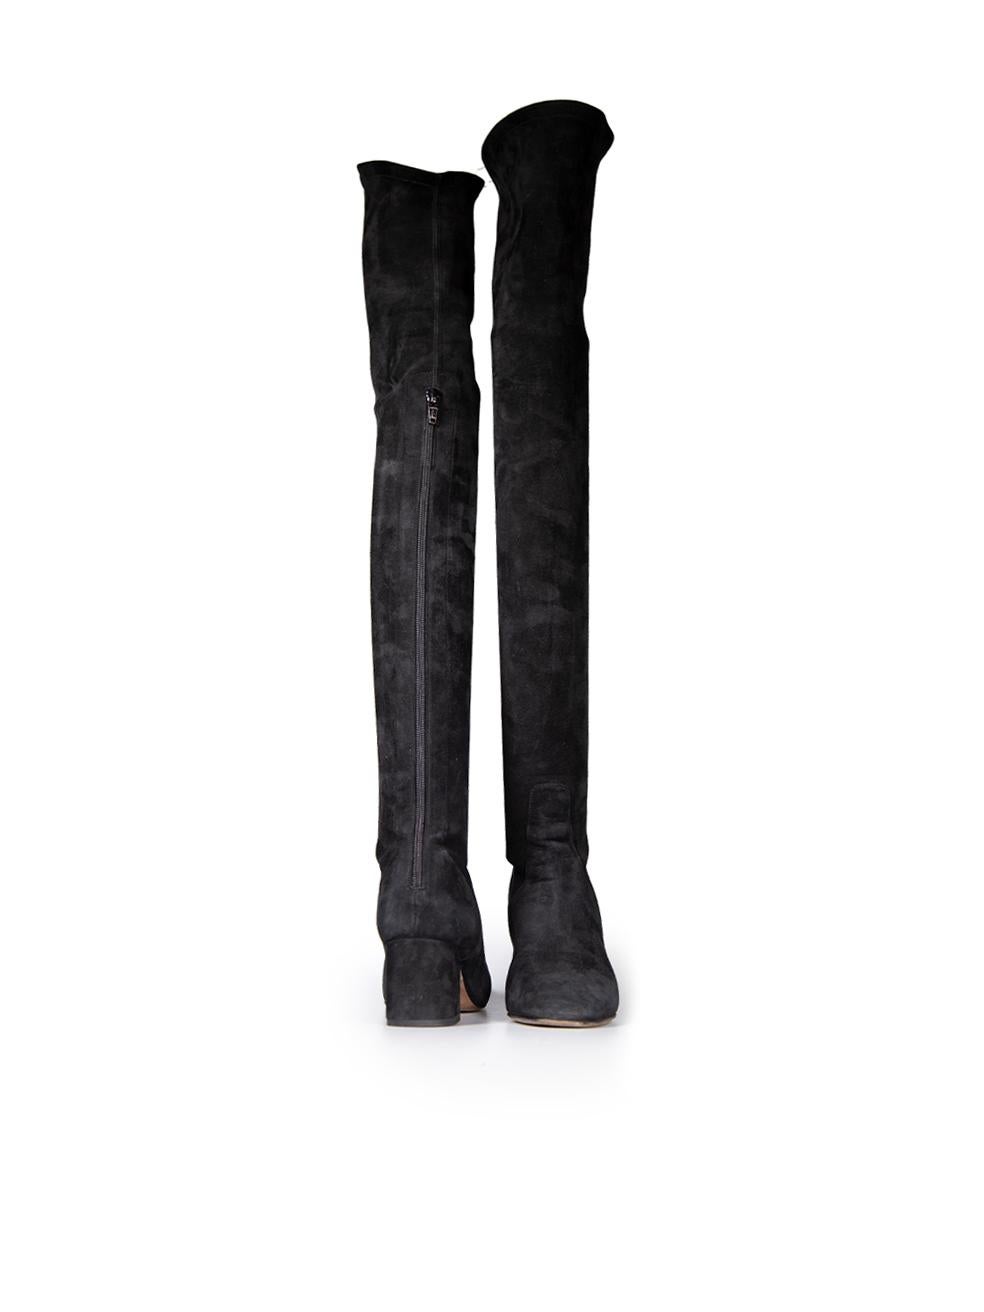 Valentino Black Suede Over-the-knee Boots Size IT 37 In Good Condition For Sale In London, GB